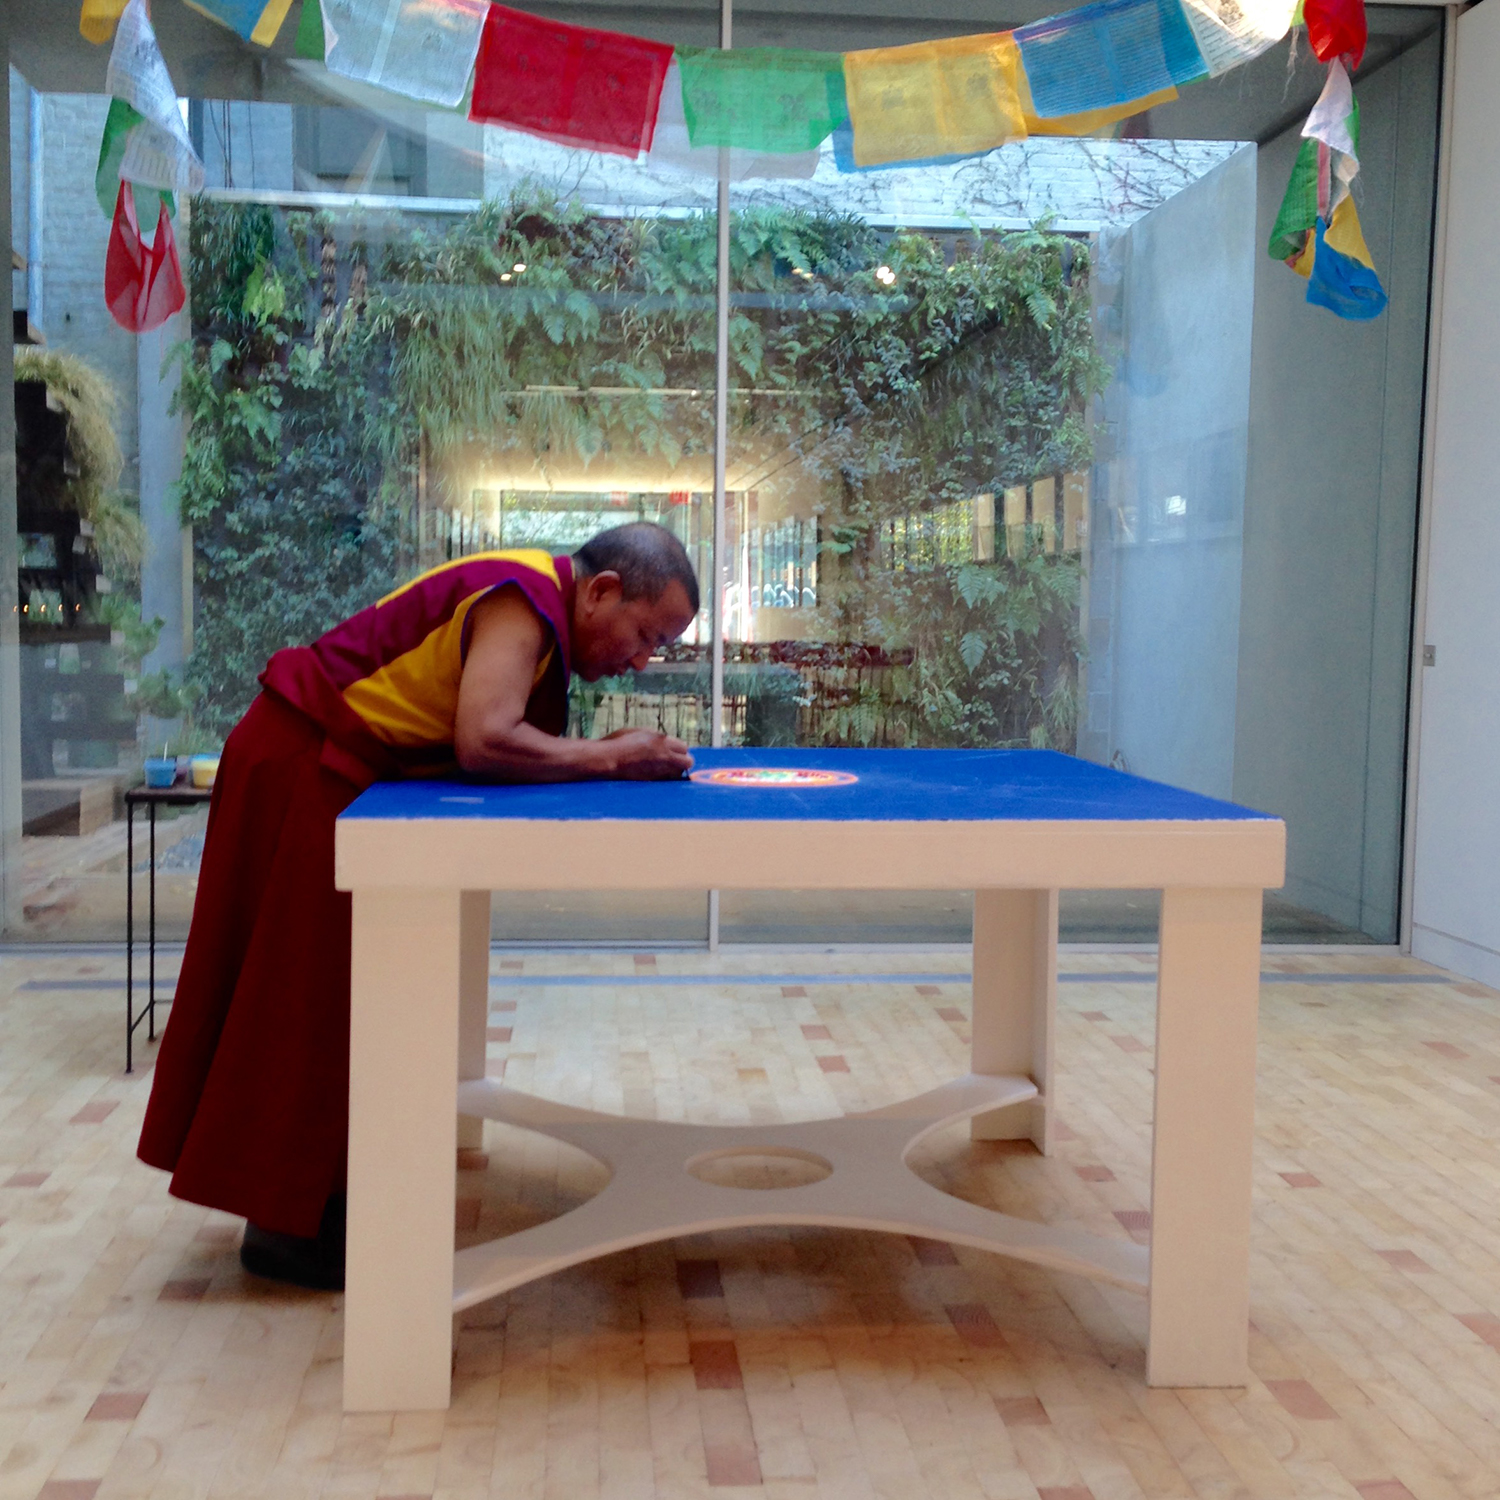 A person leaning over a blue table